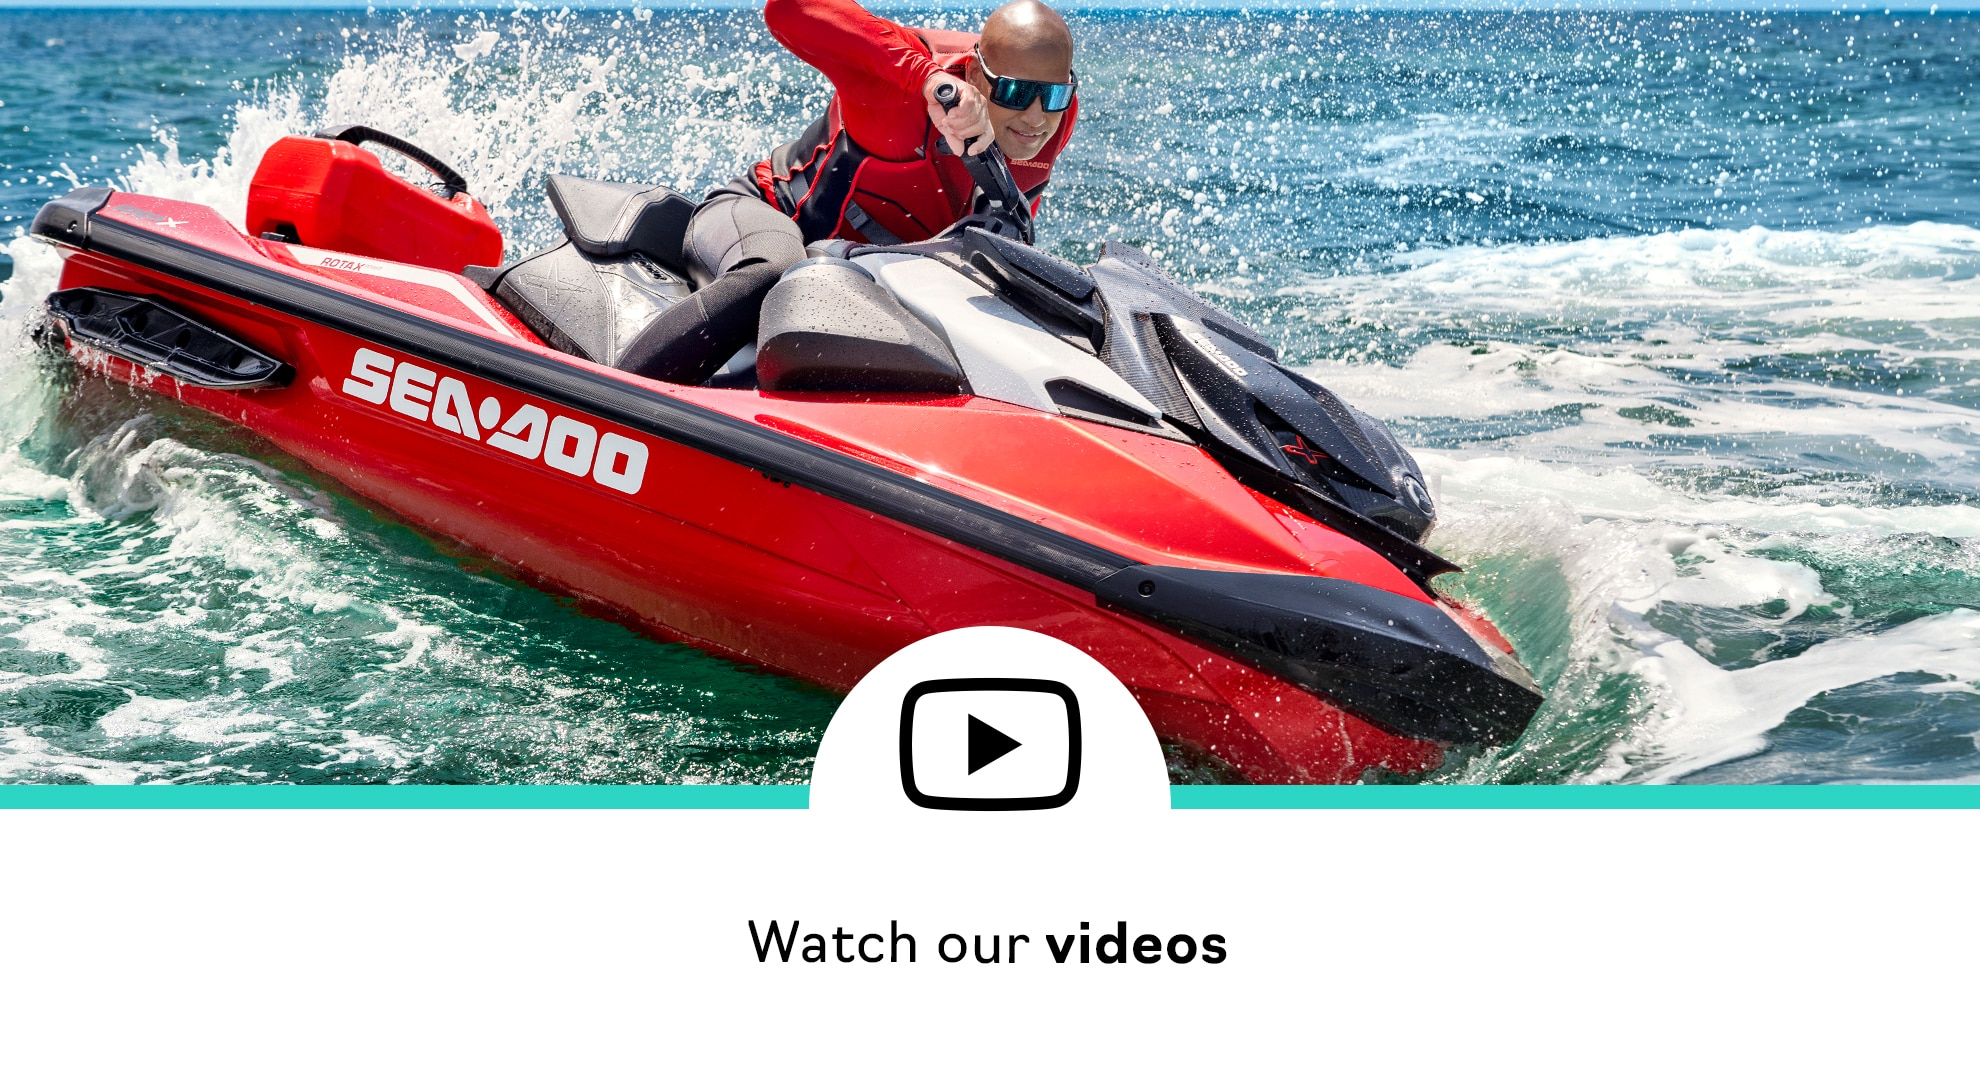 Join the Sea-Doo YouTube channel